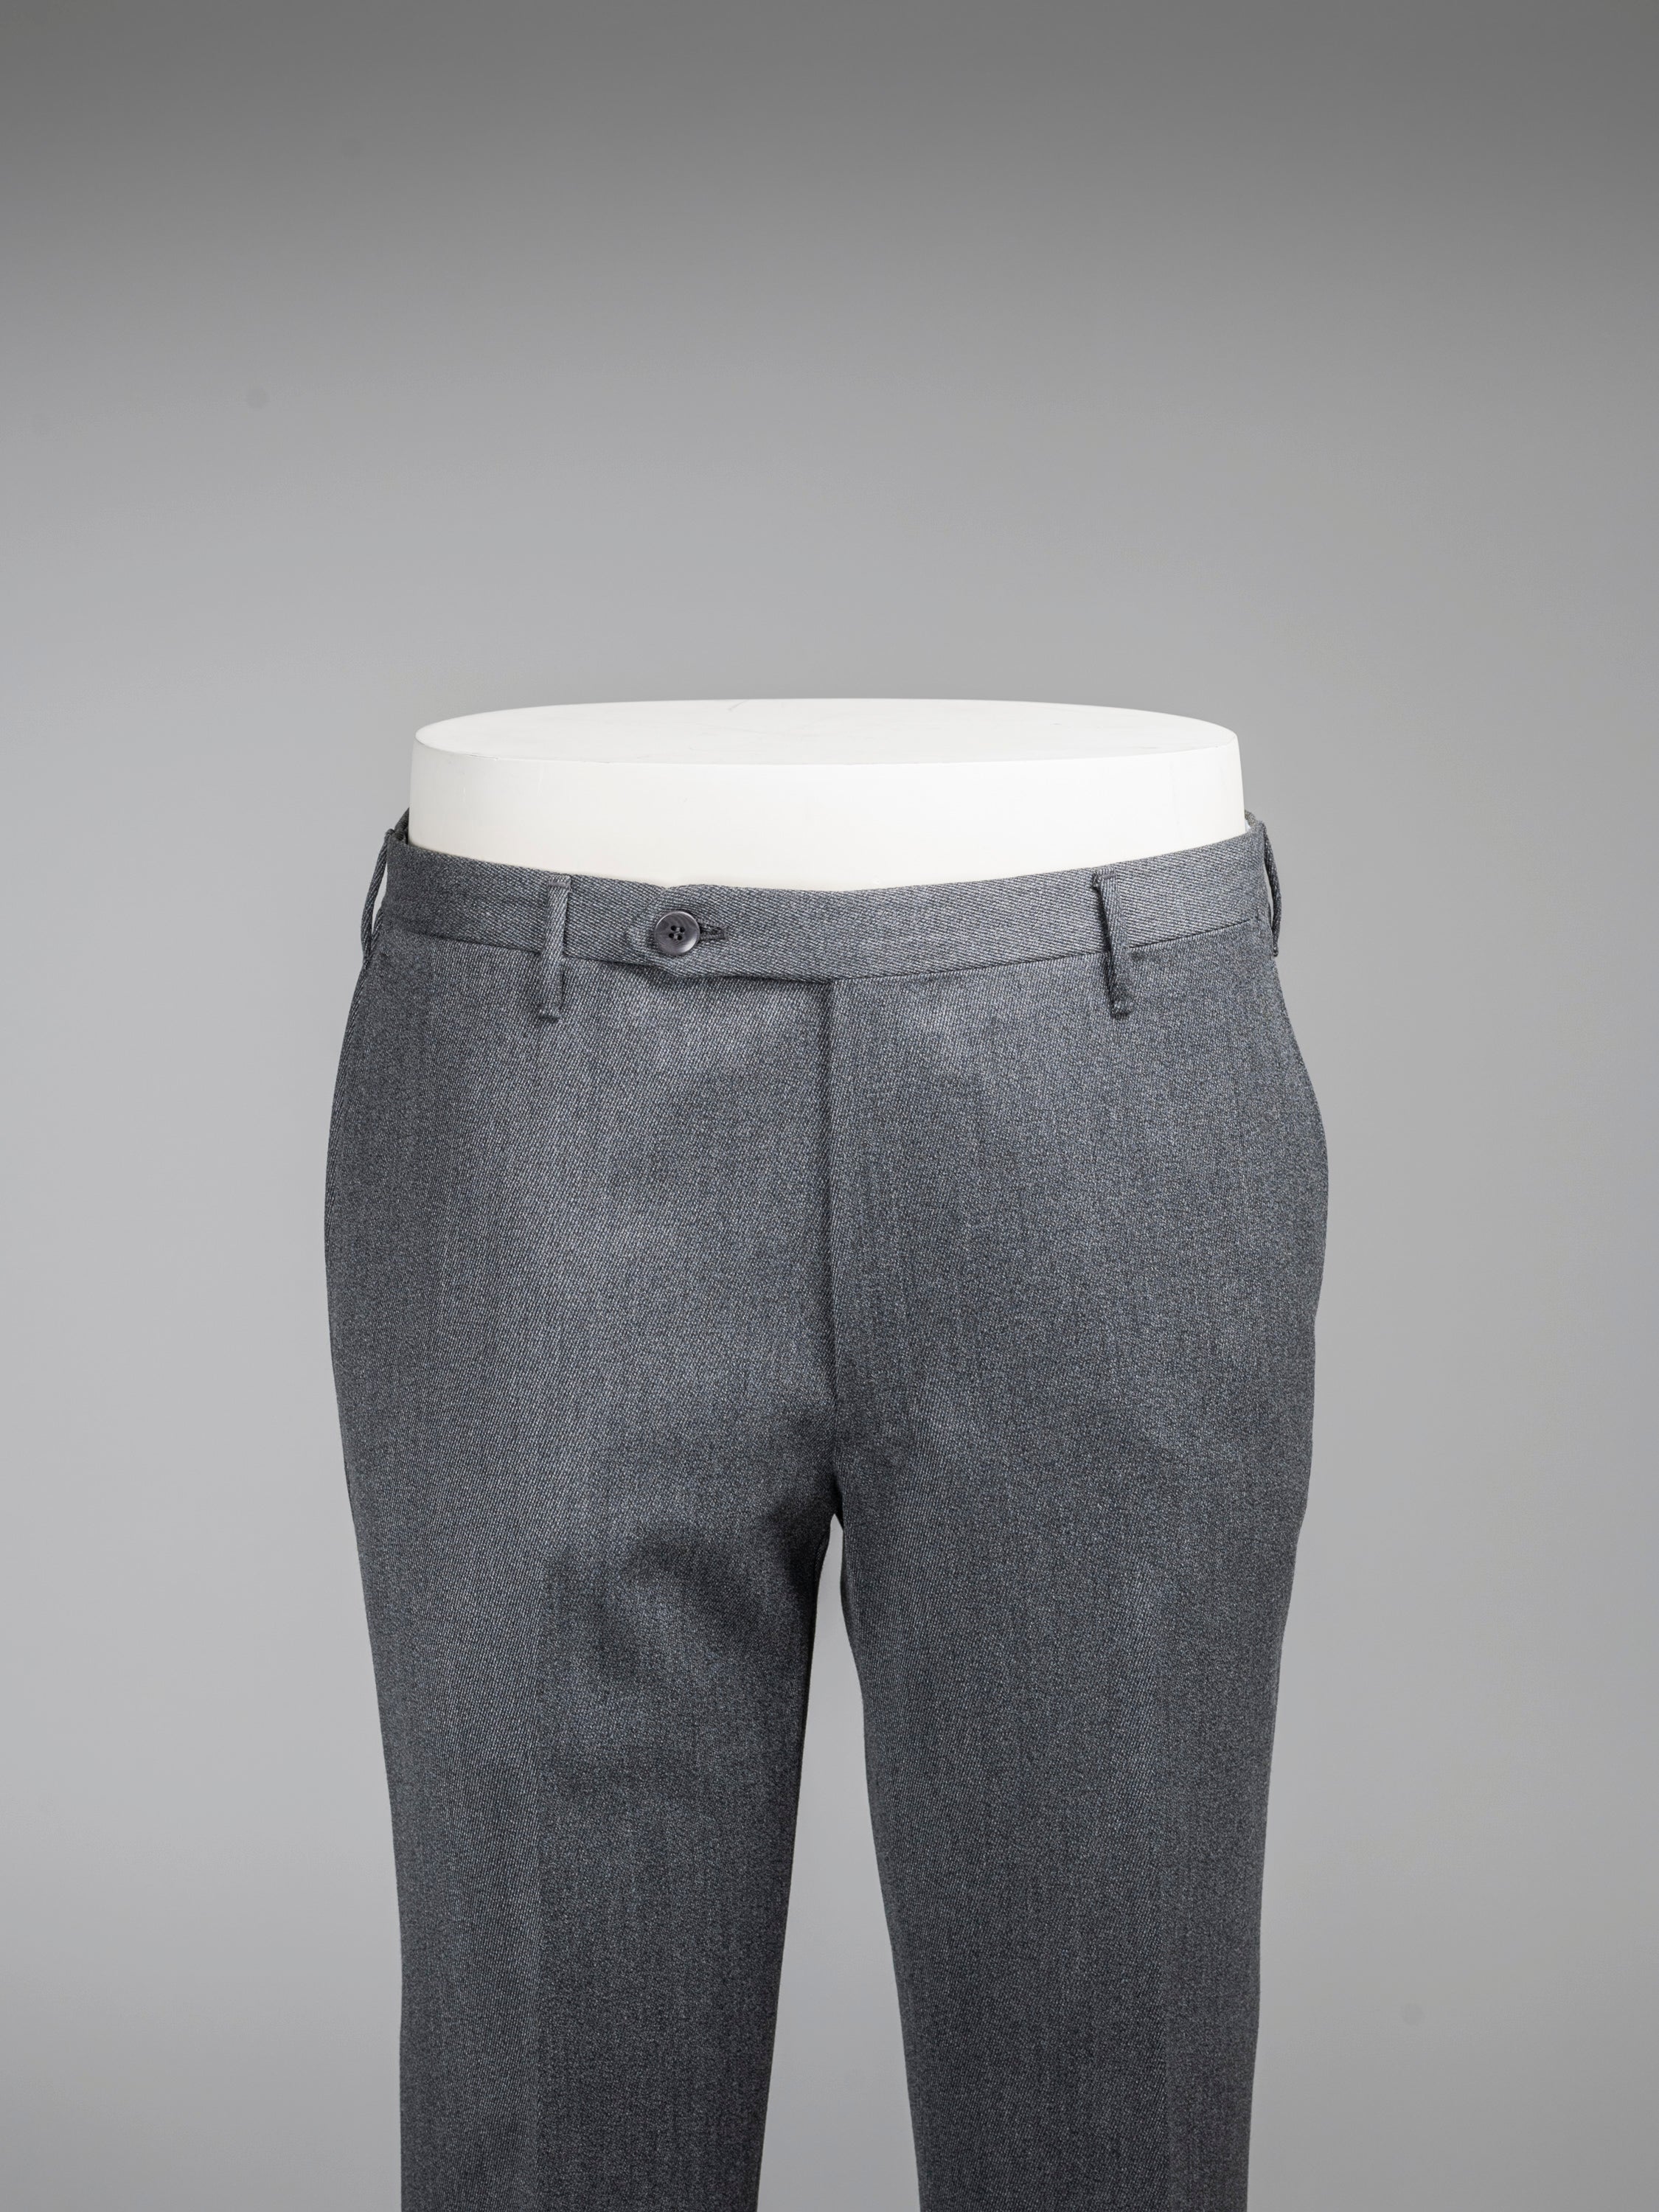 Jeff Banks | Grey Marl Regular Fit Travel Trousers | Suit Direct